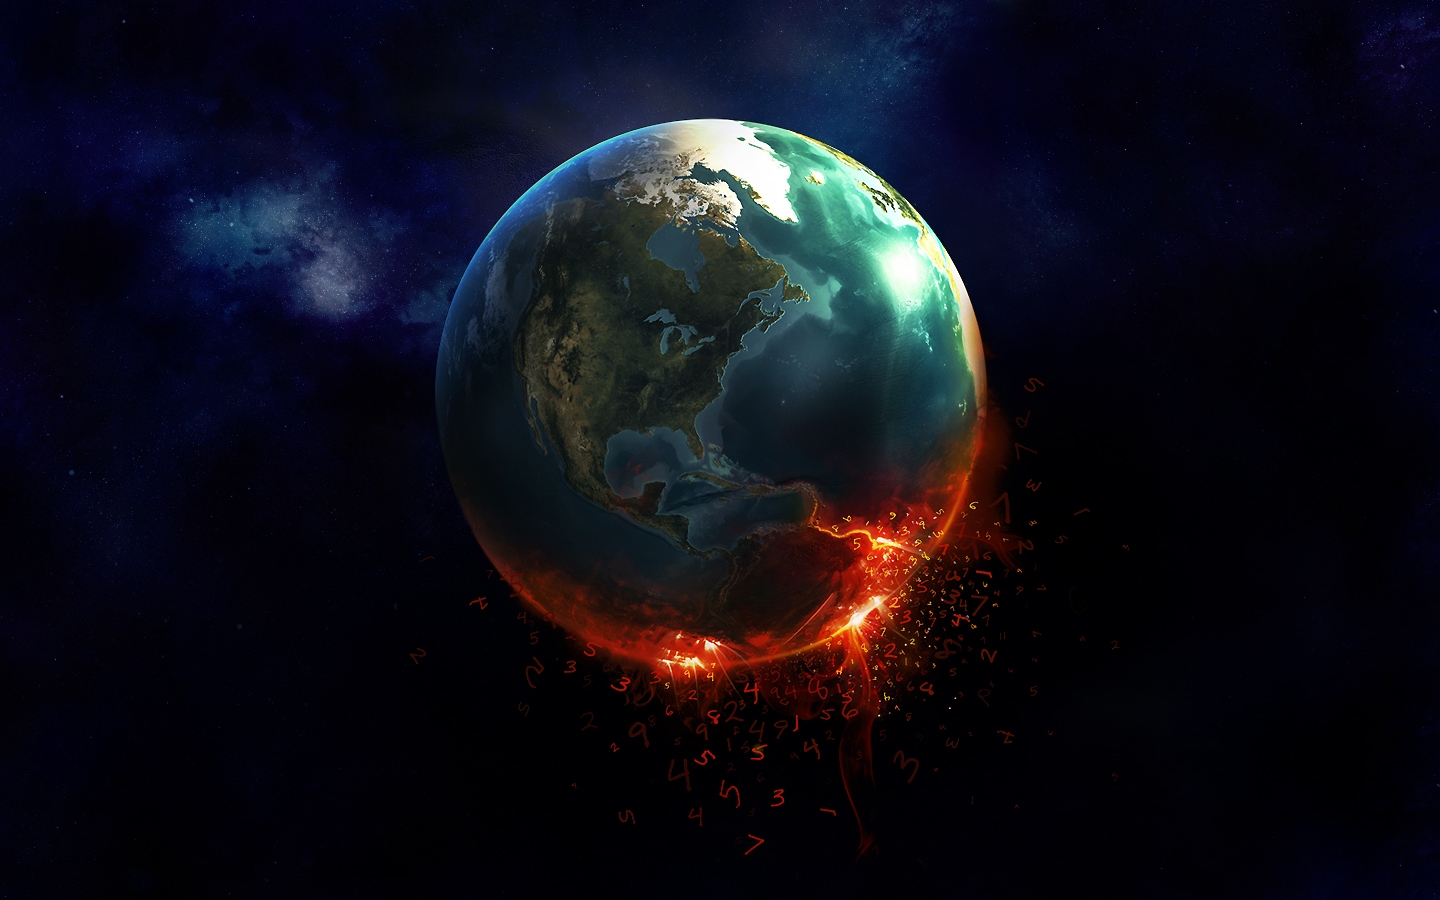 3D Earth Art wallpaper HD 2014 for iPhone Android Desktop 1440x900